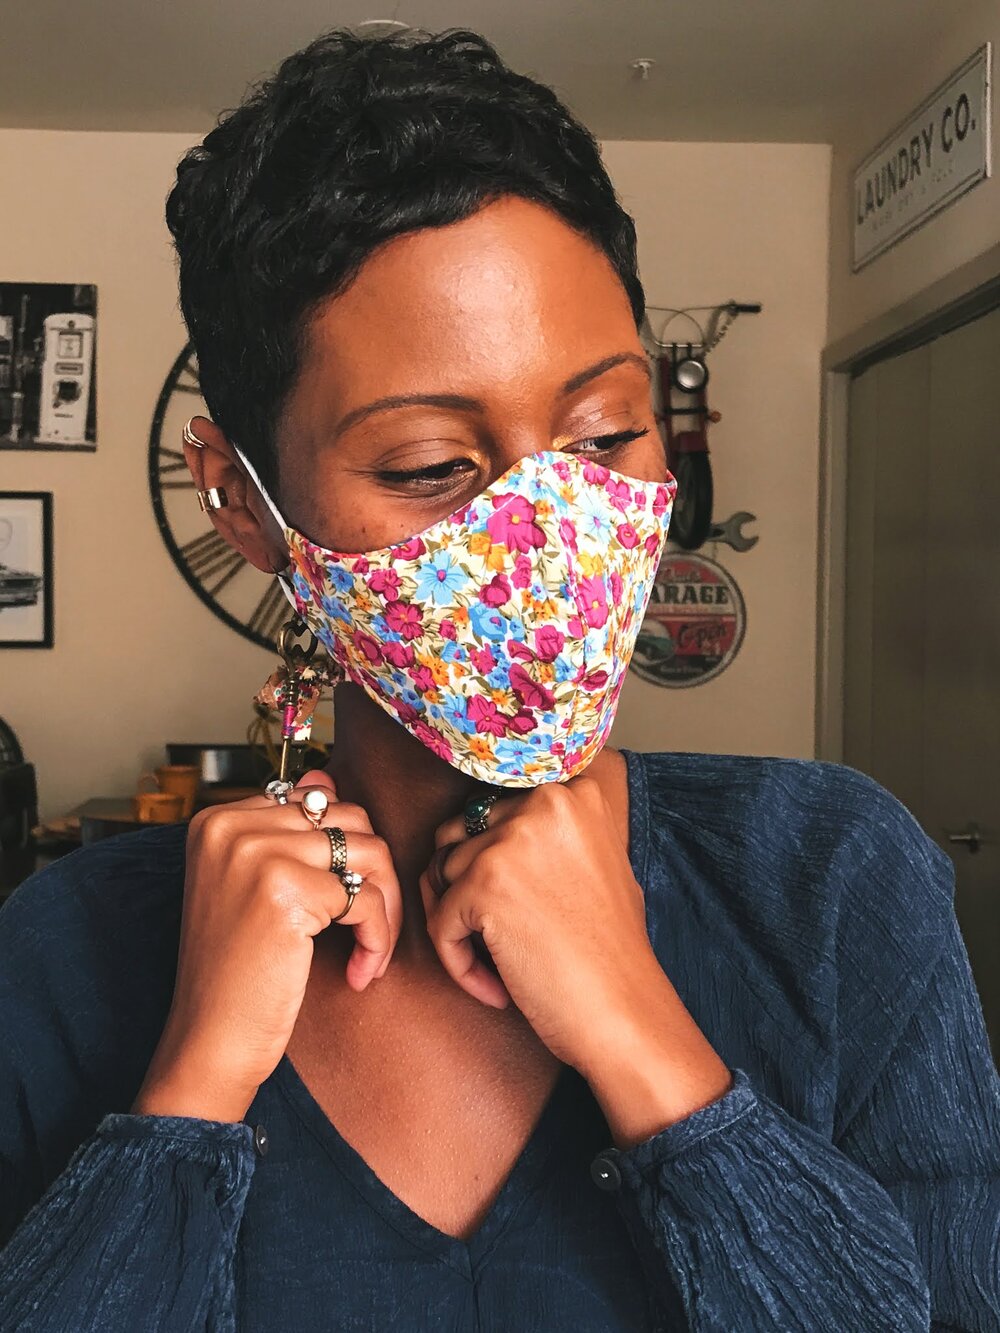 Reversible Floral Face Masks That Make You Feel Stylish And Fierce